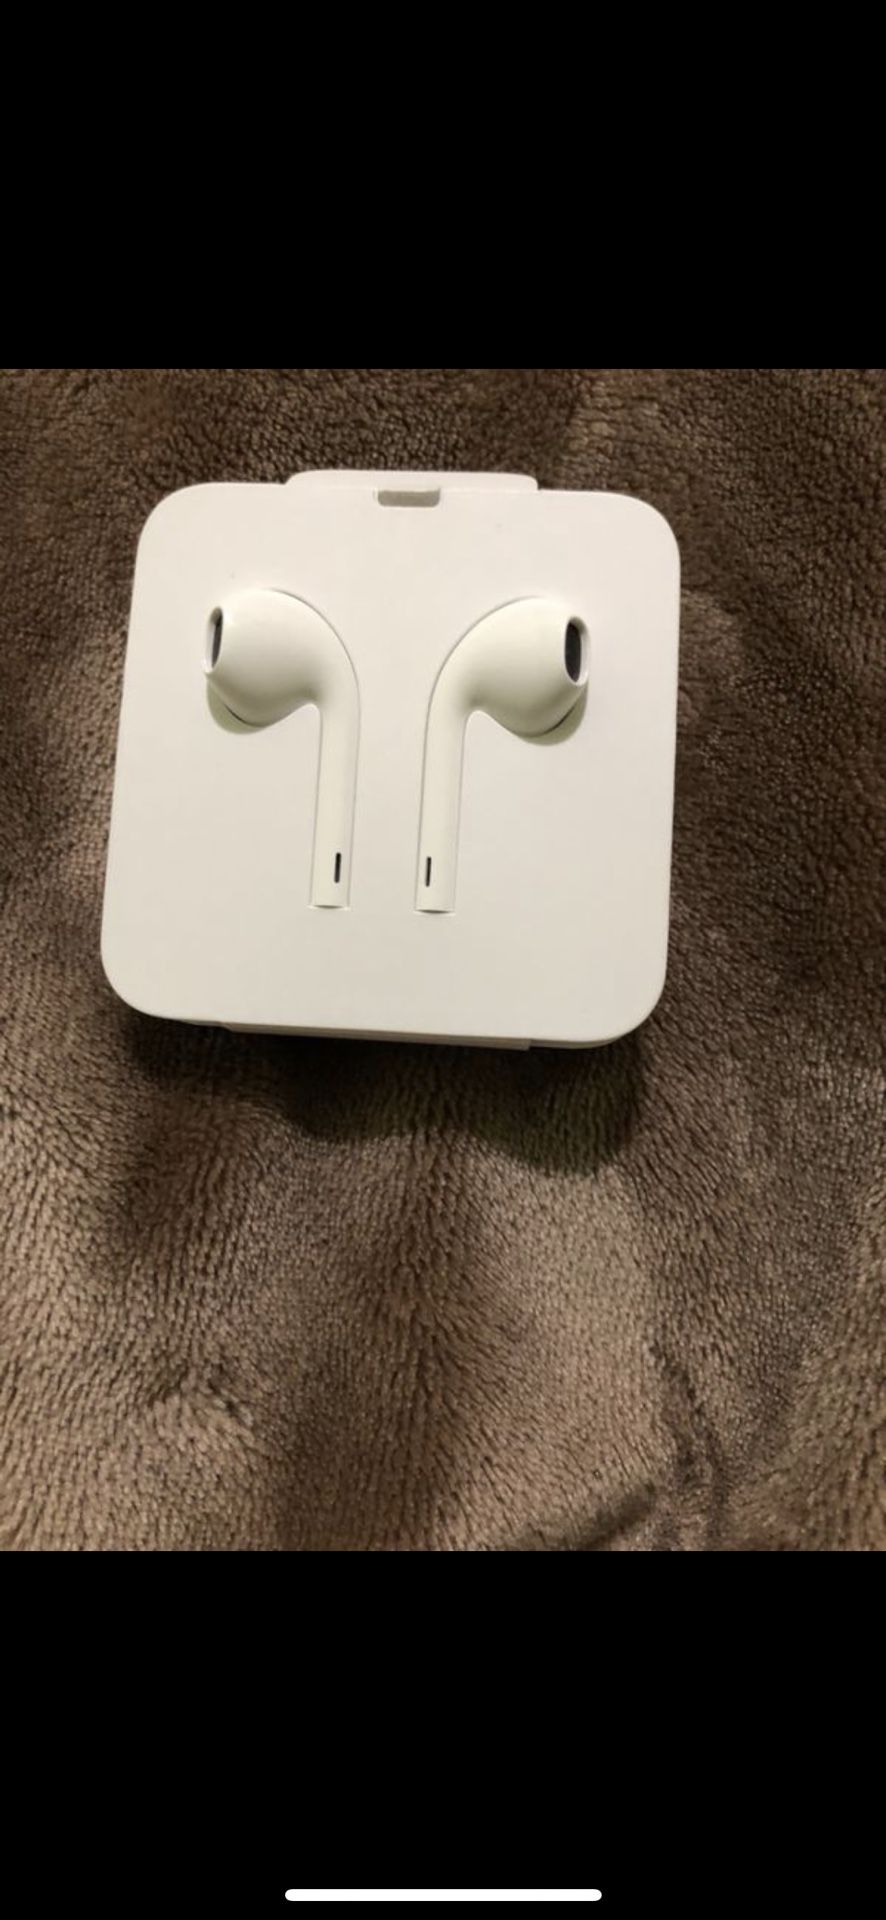 Apple headphones with adapter $25 Standard wired Apple headphones with built in mic and included adapter.